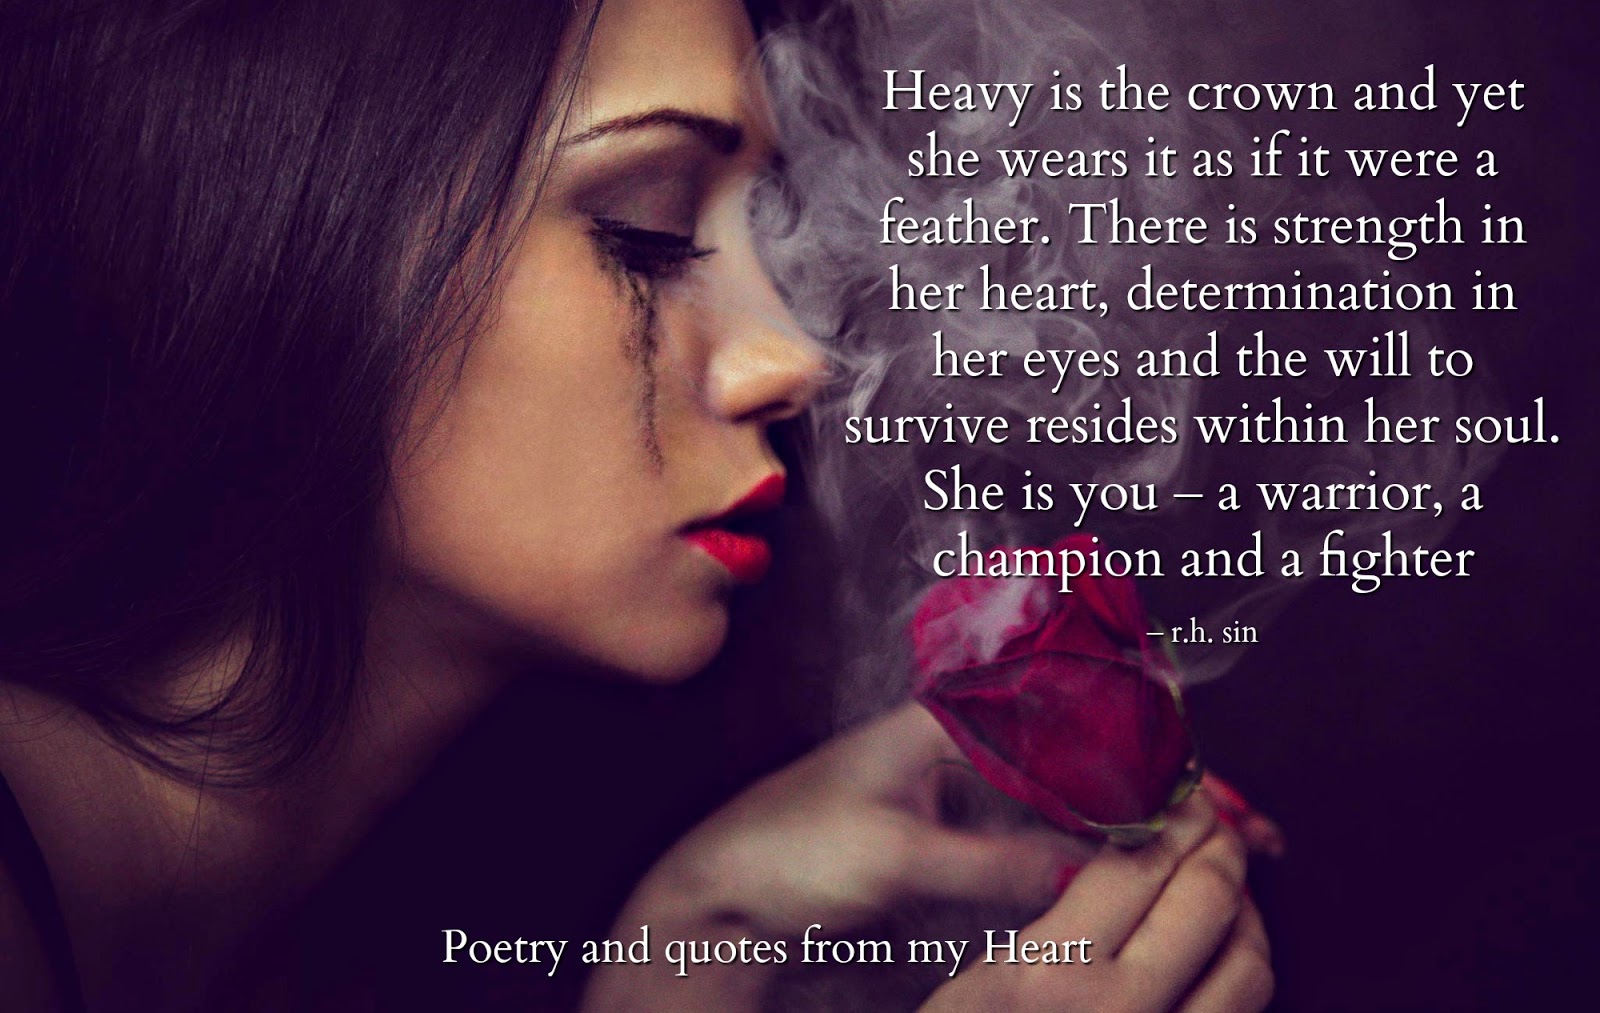 Poetry and quotes from my Heart: Heavy is the crown and yet she wears it as if it were a feather. There is strength in her determination in her eyes and